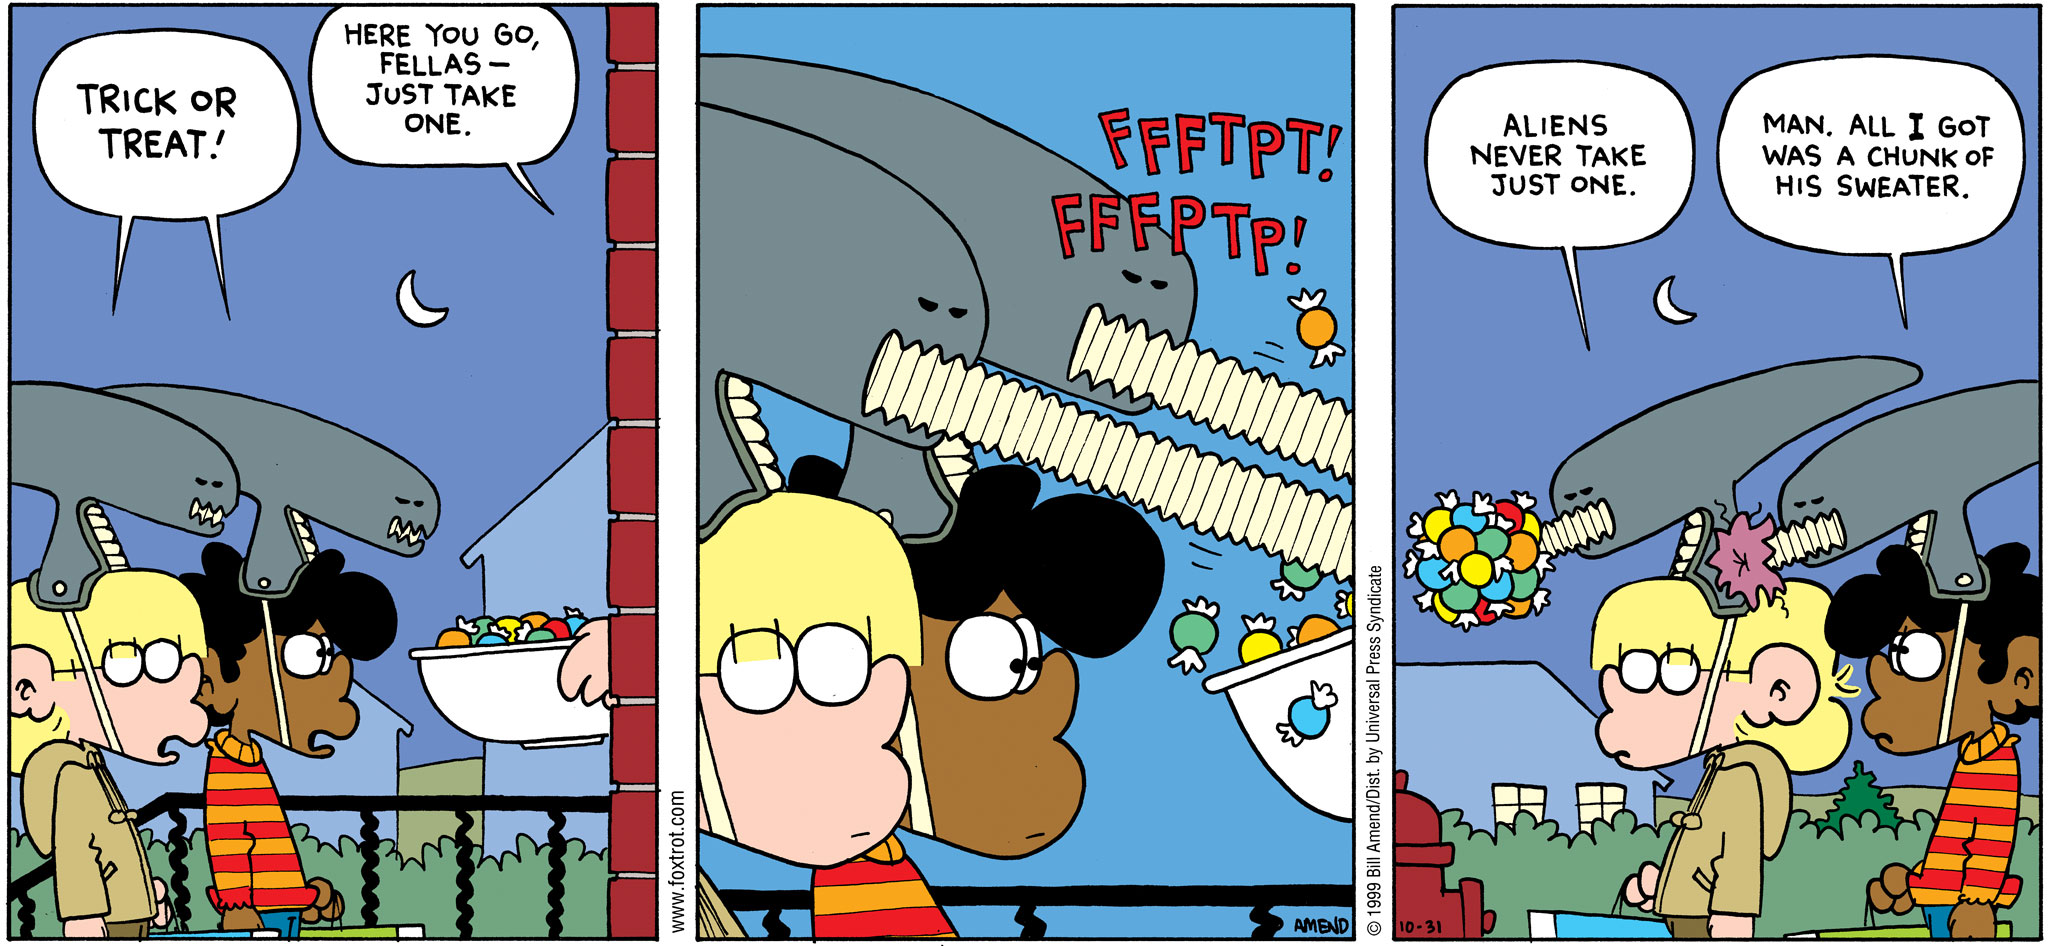 Halloween Comics - FoxTrot comic strip by Bill Amend - Published October 31, 1999 - Jason & Marcus Jones: Trick or Treat! Neighbor: Here you go, fellas - just take one. Jason Fox: Aliens never take just one. Marcus Jones: Man, all I got was a chunk of his sweater.